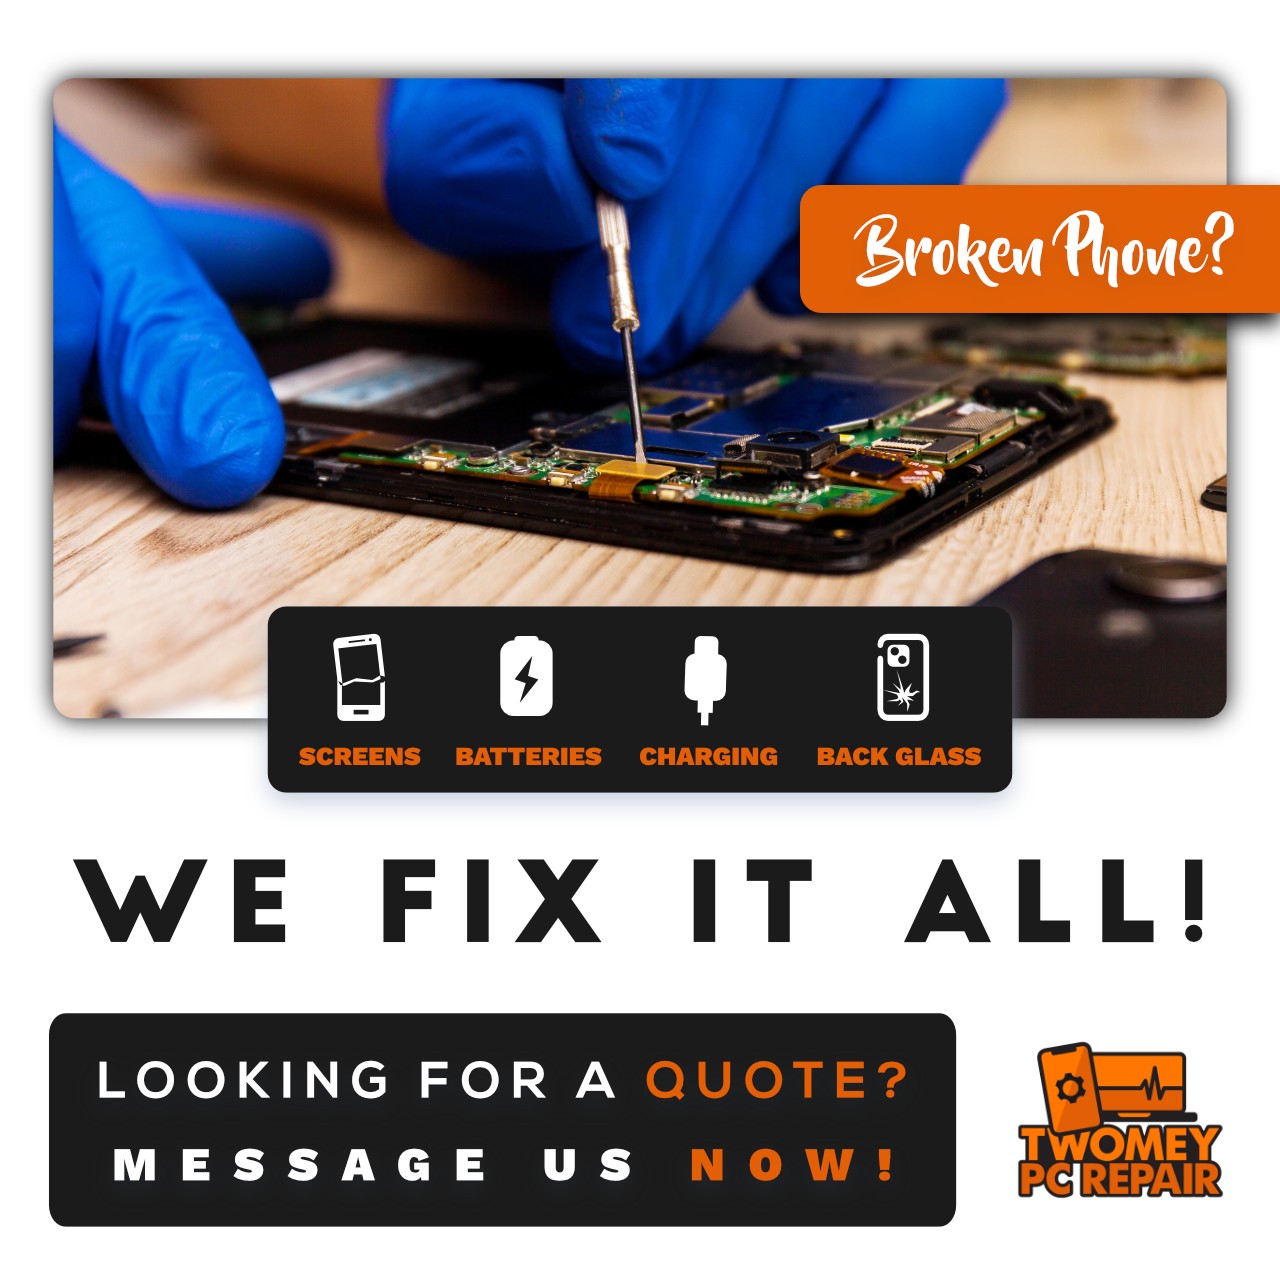 A broken cellphone with the text "we fix it all" looking for a quote on cellphone repair.